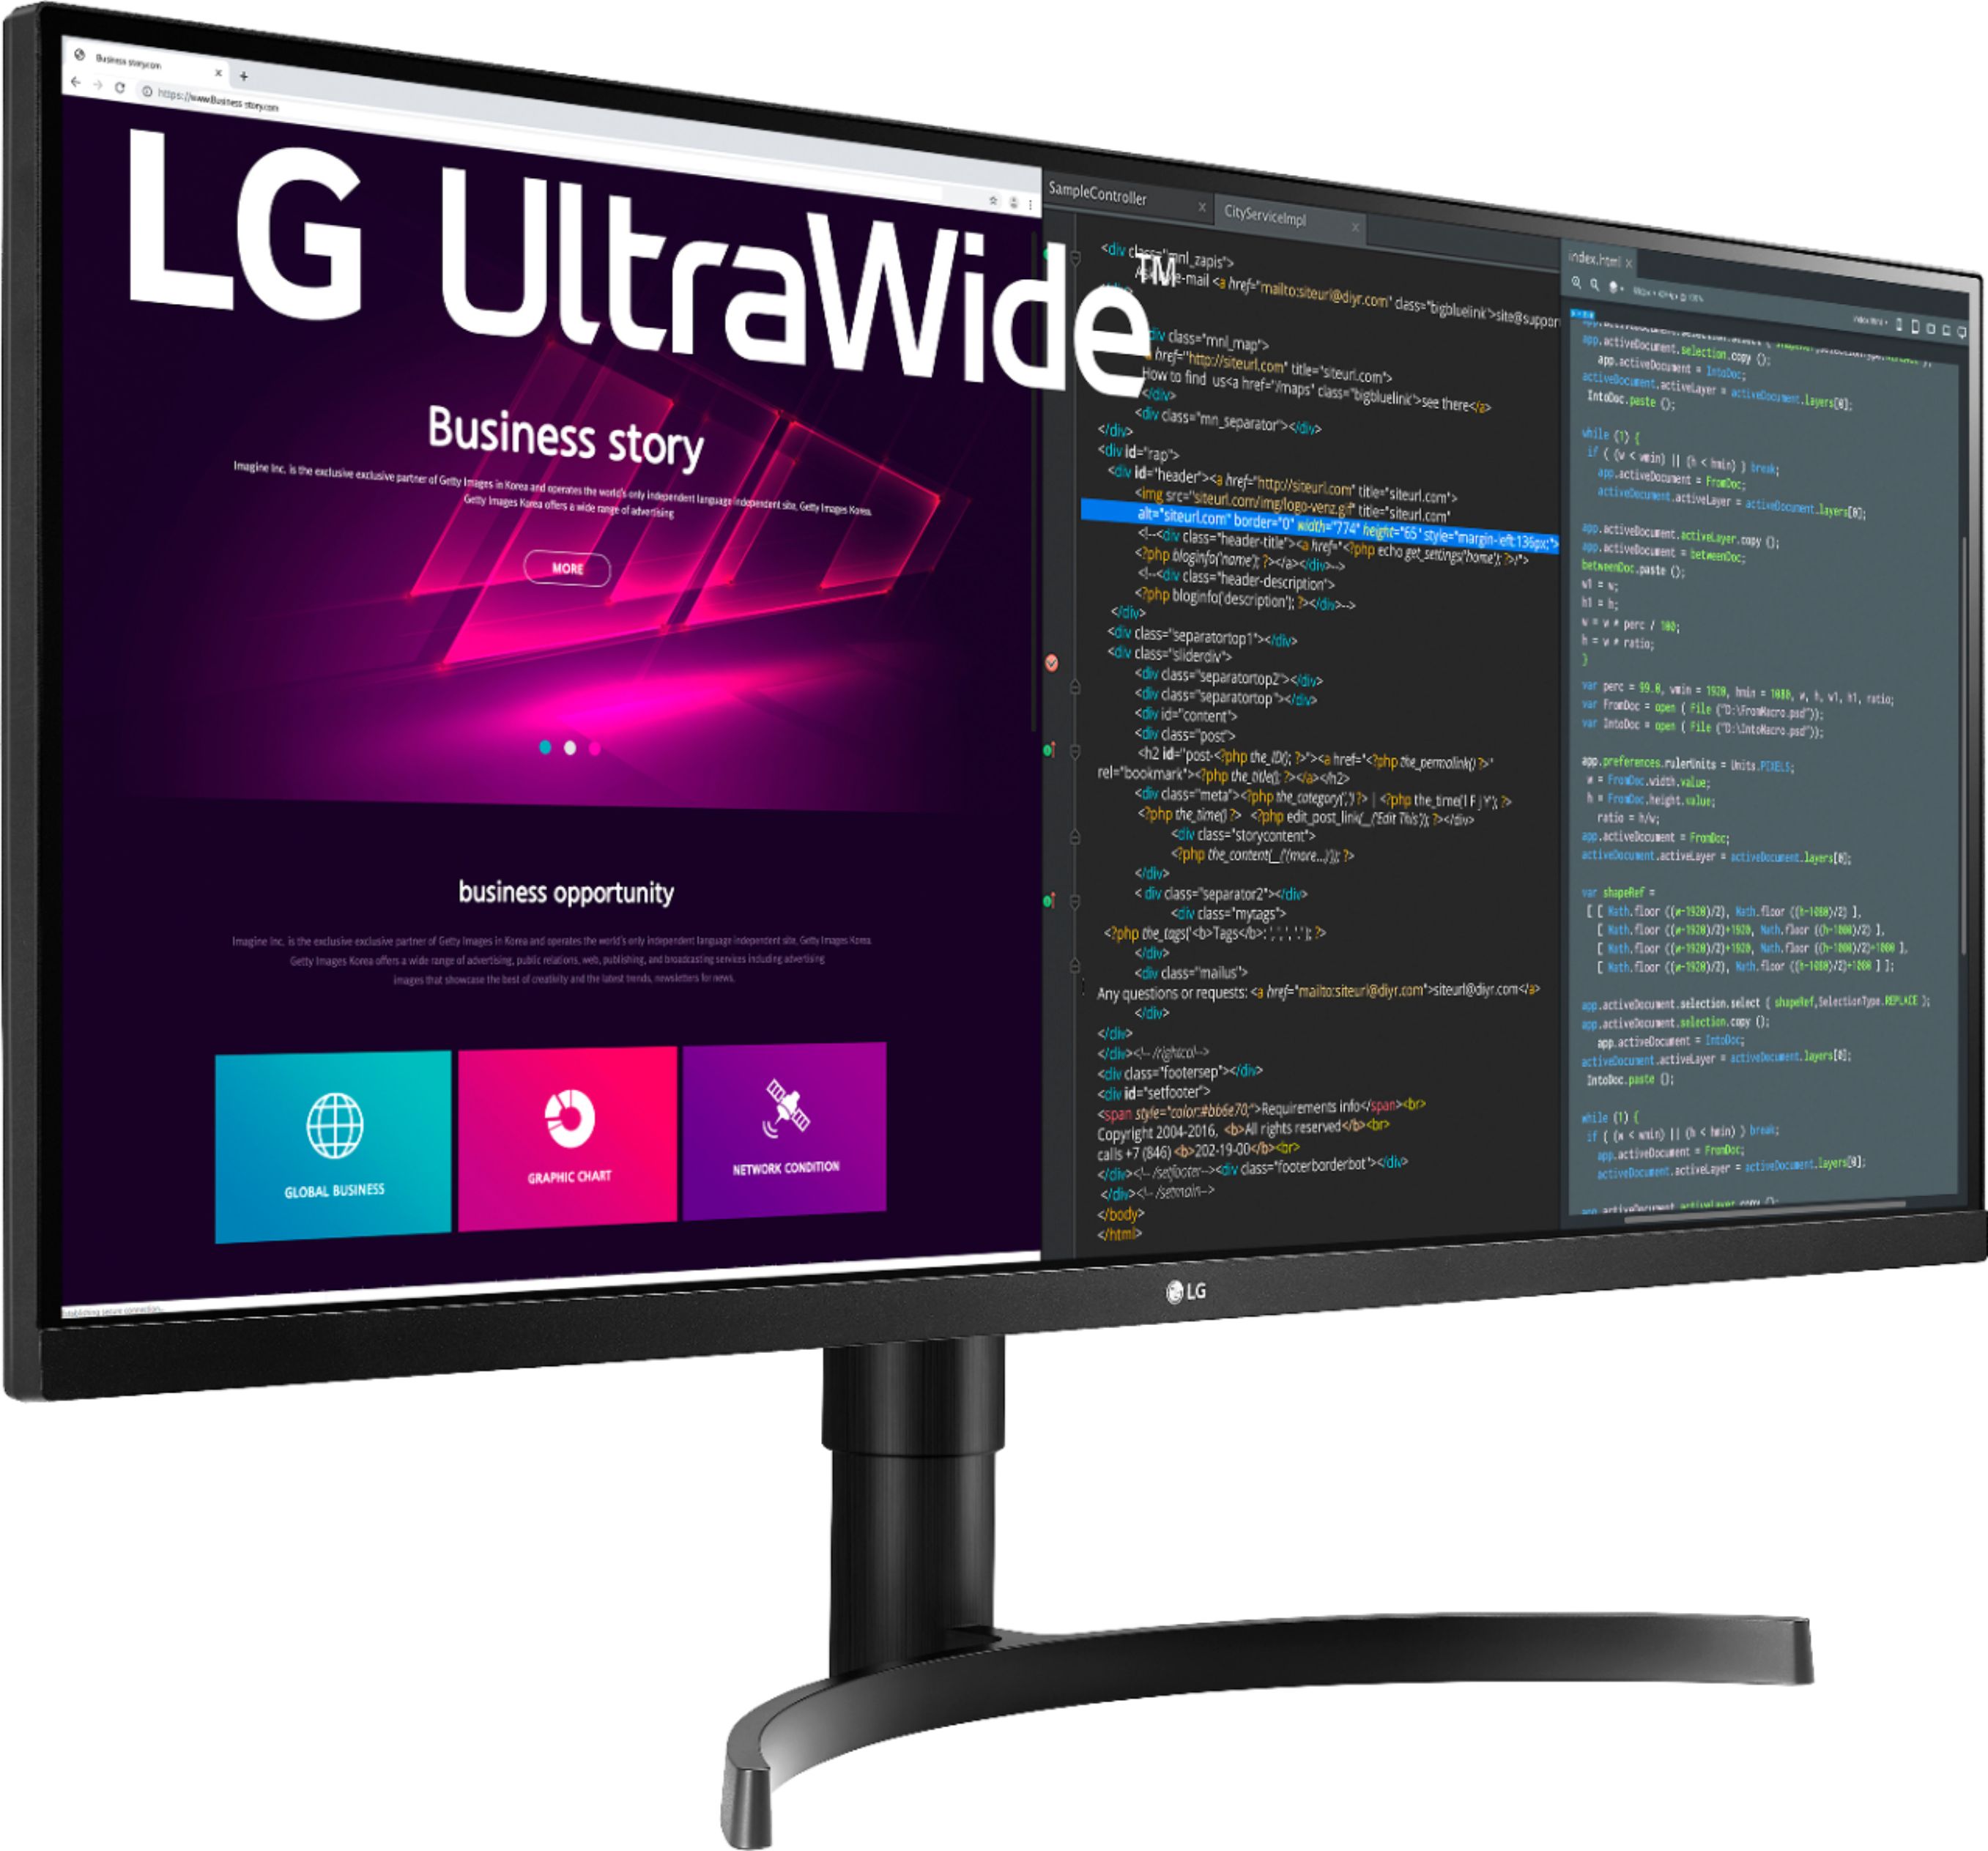 This 34-inch LG ultrawide gaming monitor is just $200 after a wild $250  discount